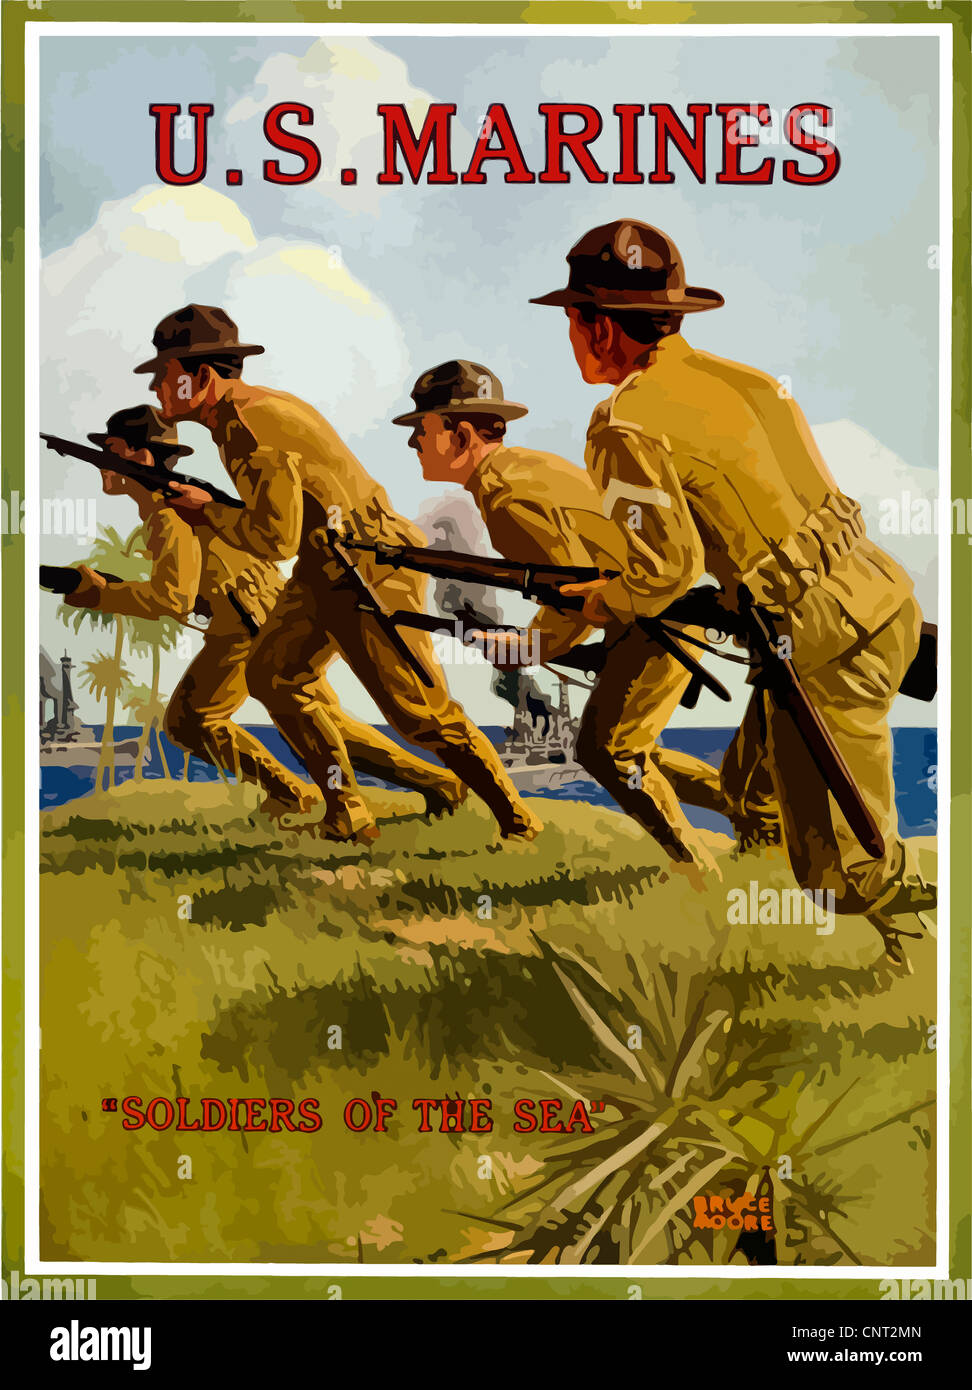 This vintage World War One poster features US Marines charging into battle with their rifles. Stock Photo